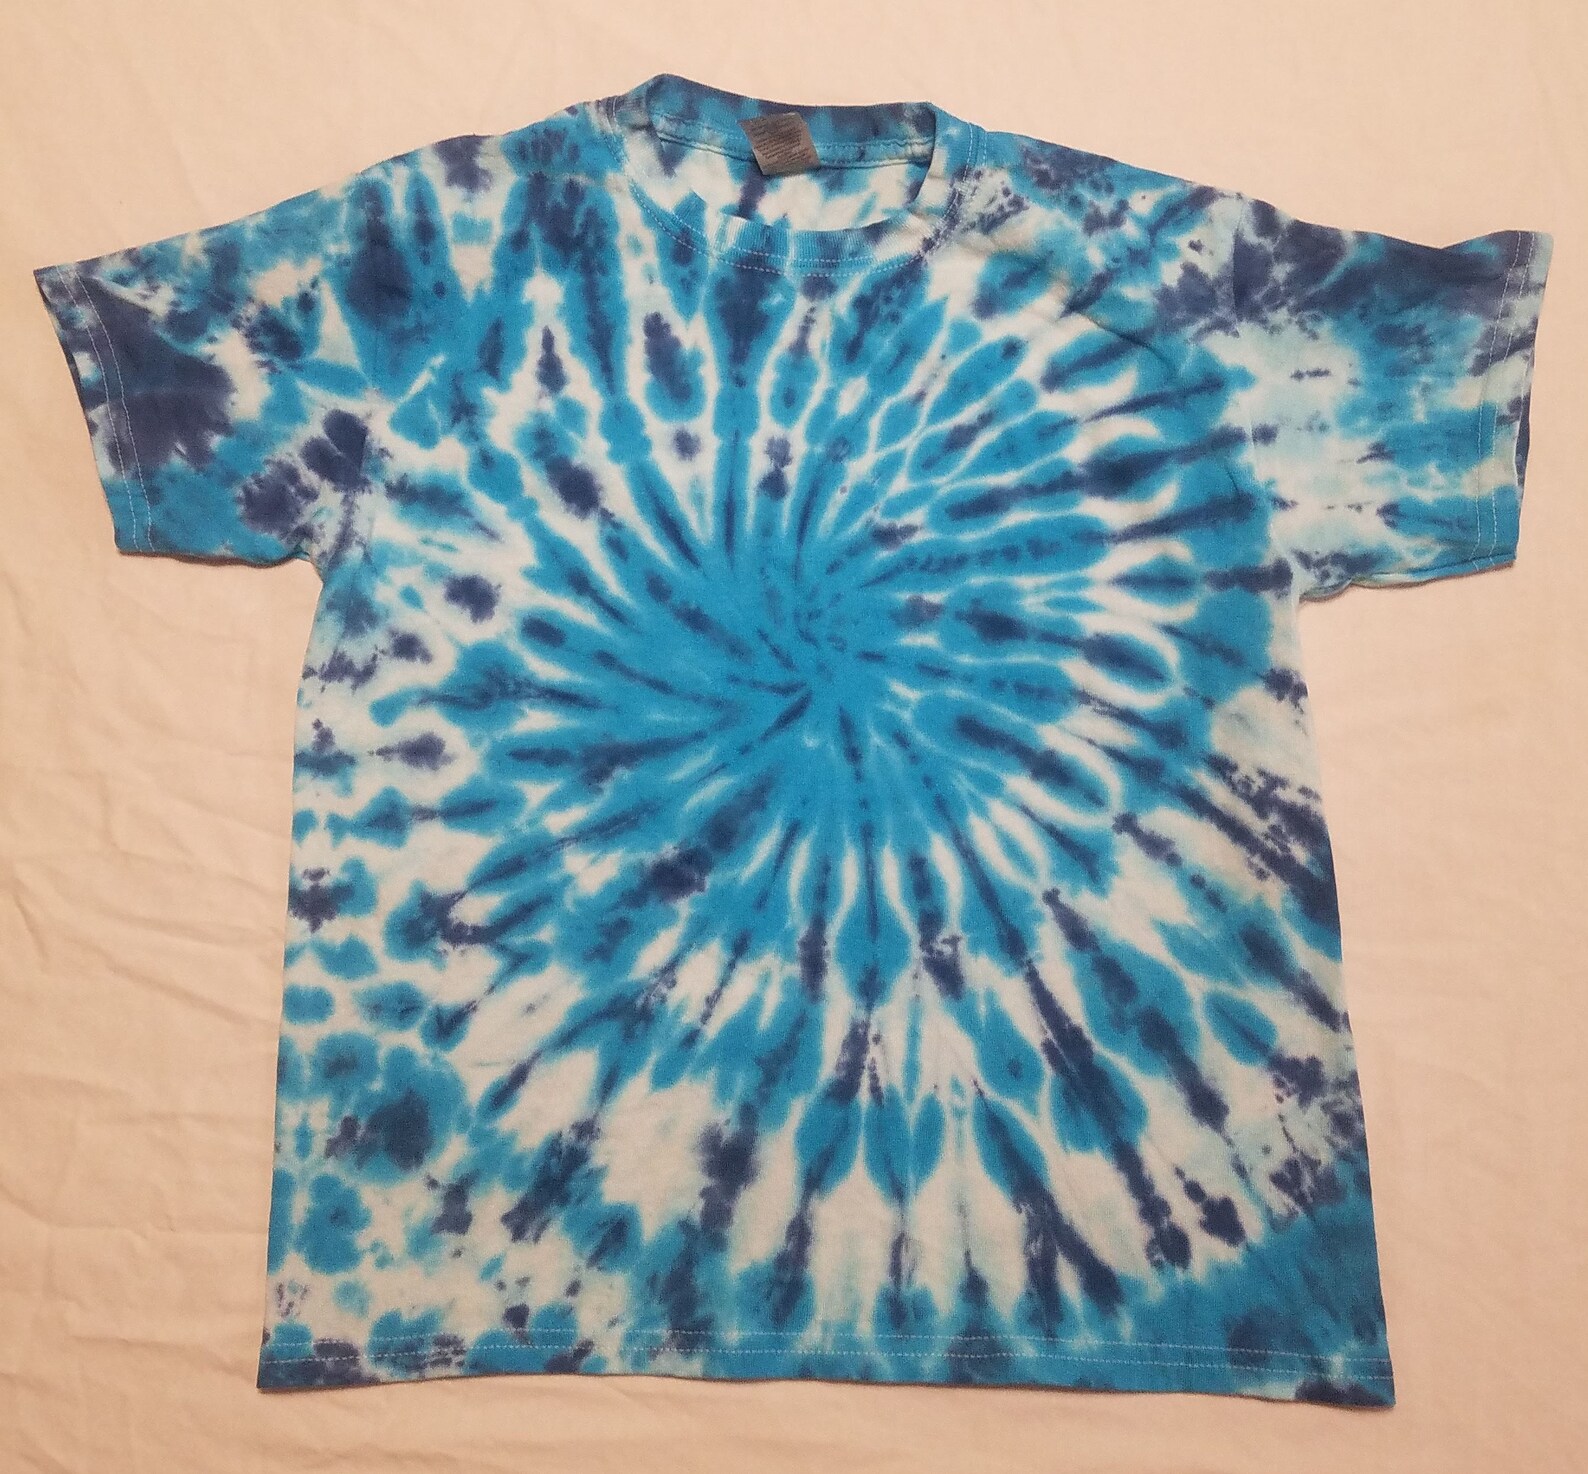 Custom Youth Blue Swirl Tie Dyed Shirt size large by AZtiedyes | Etsy